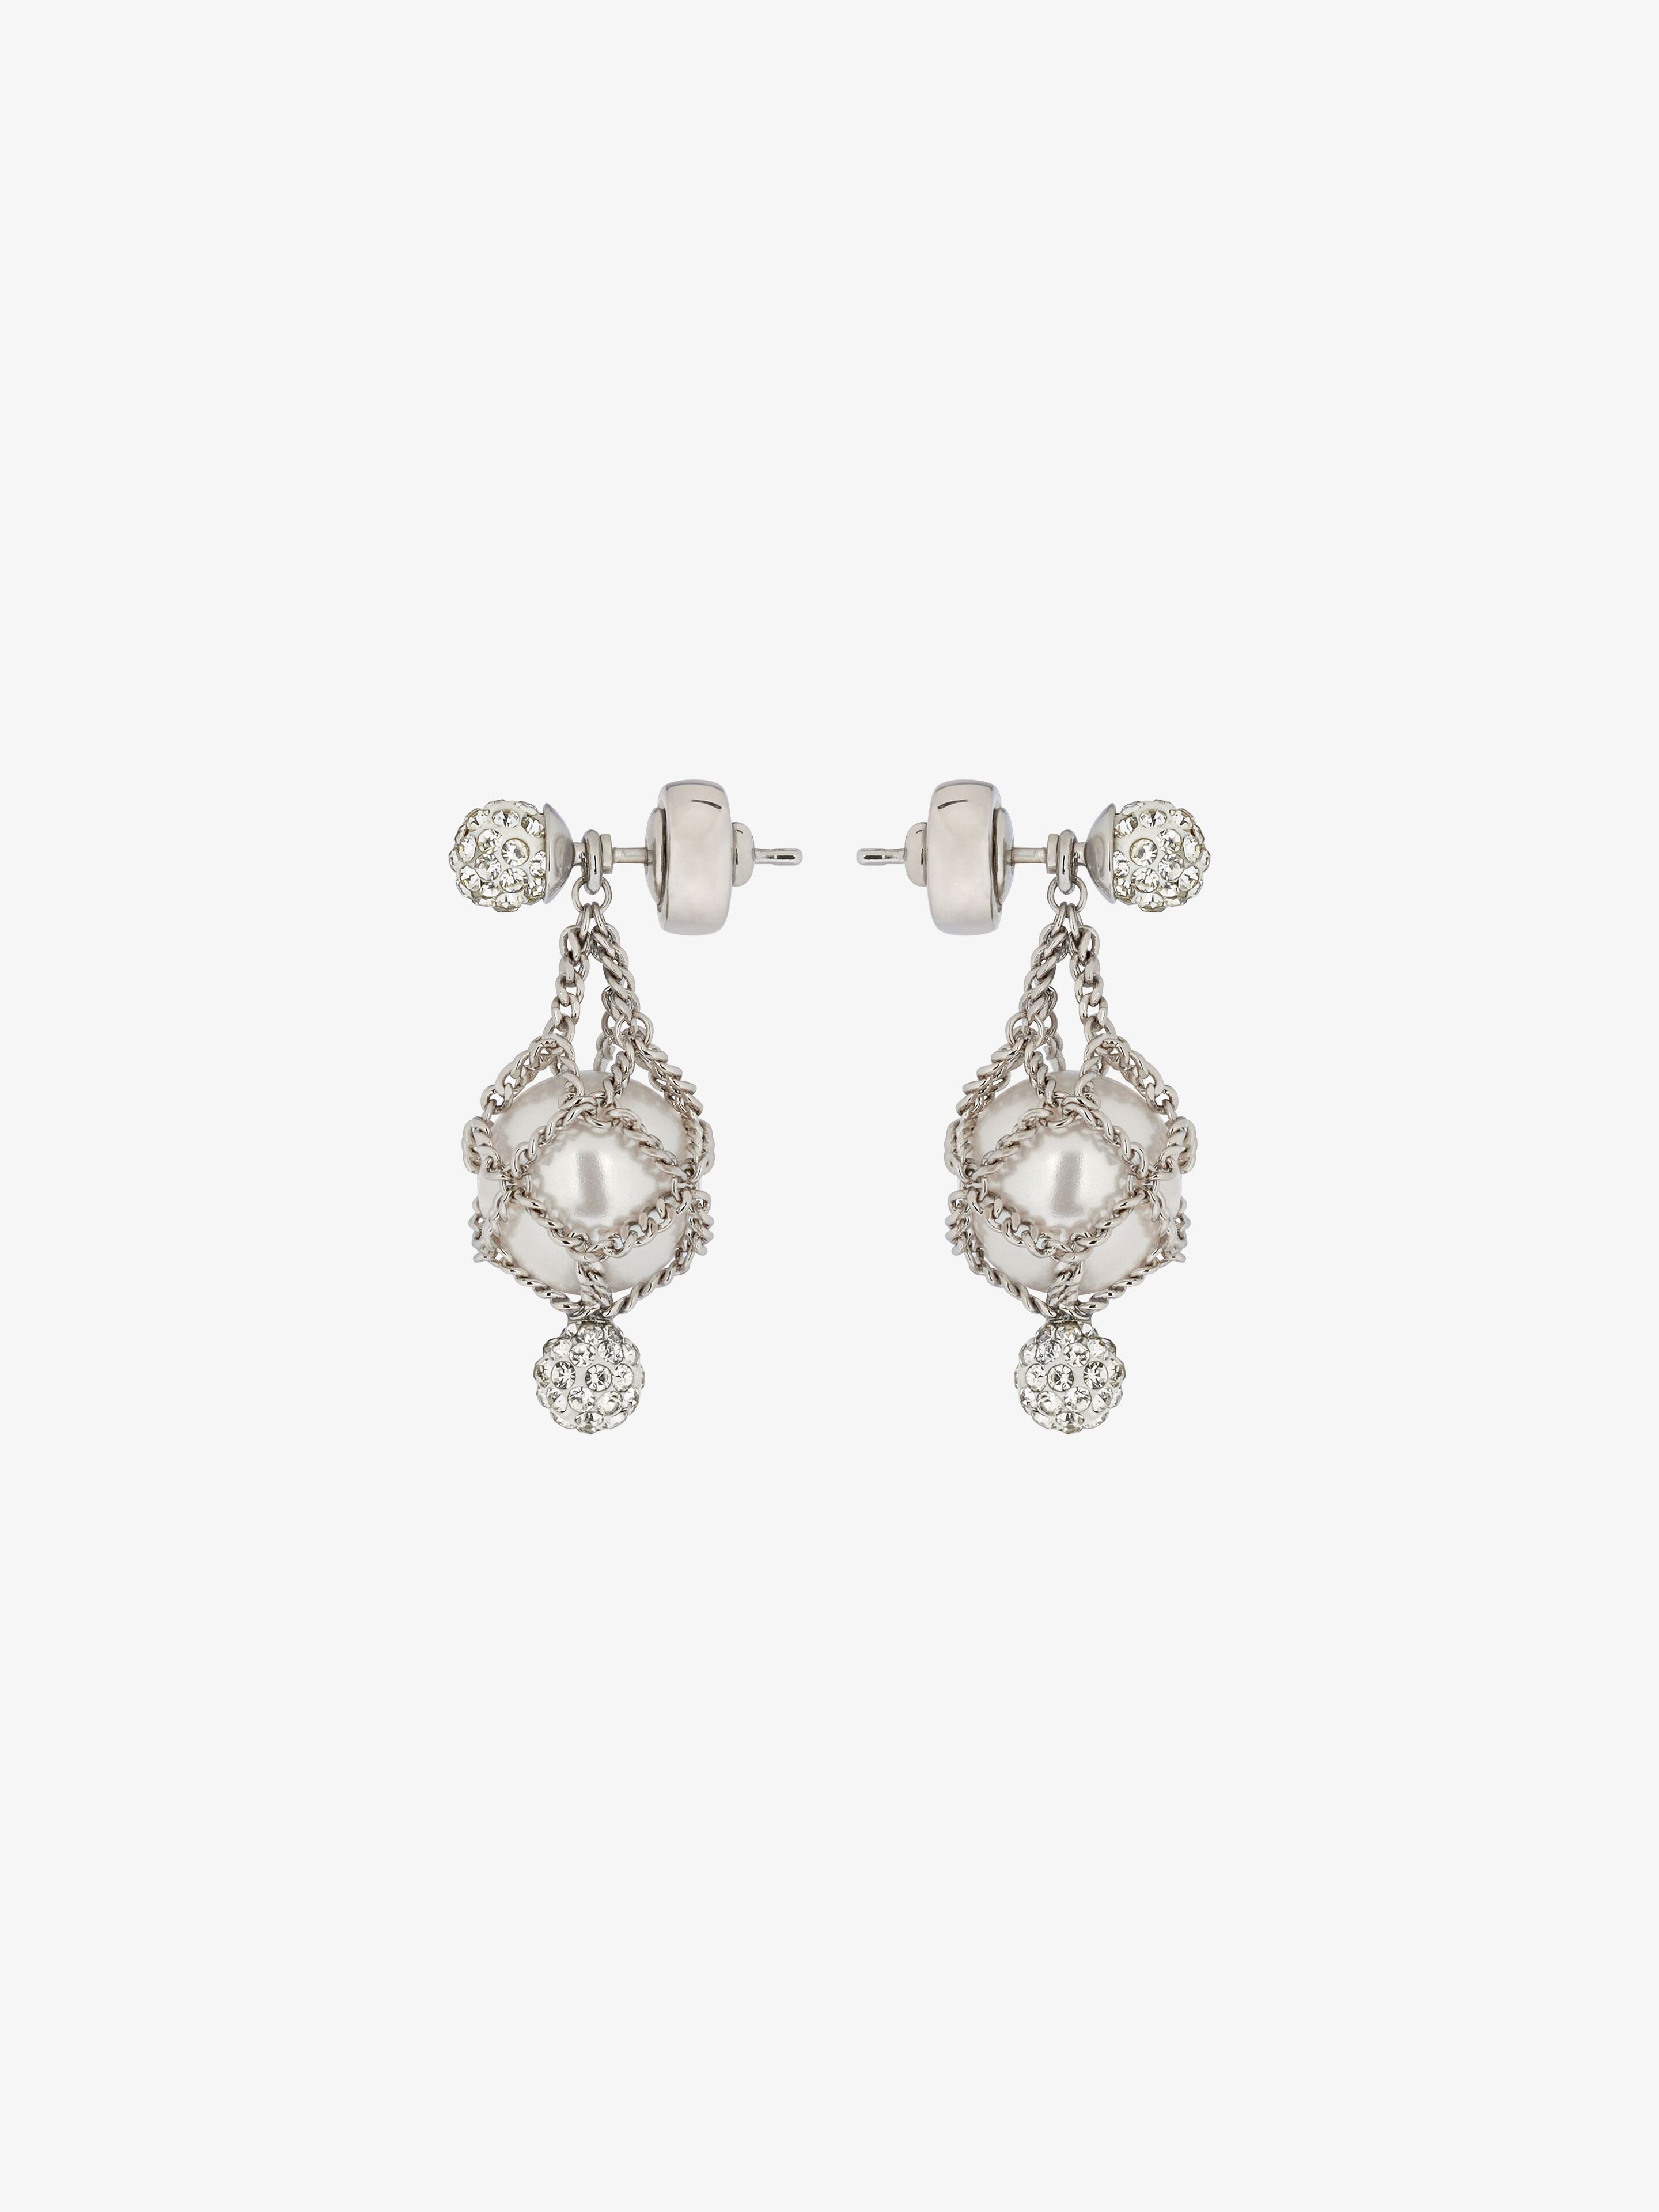 PEARLING EARRINGS IN METAL WITH PEARLS AND CRYSTALS - 5